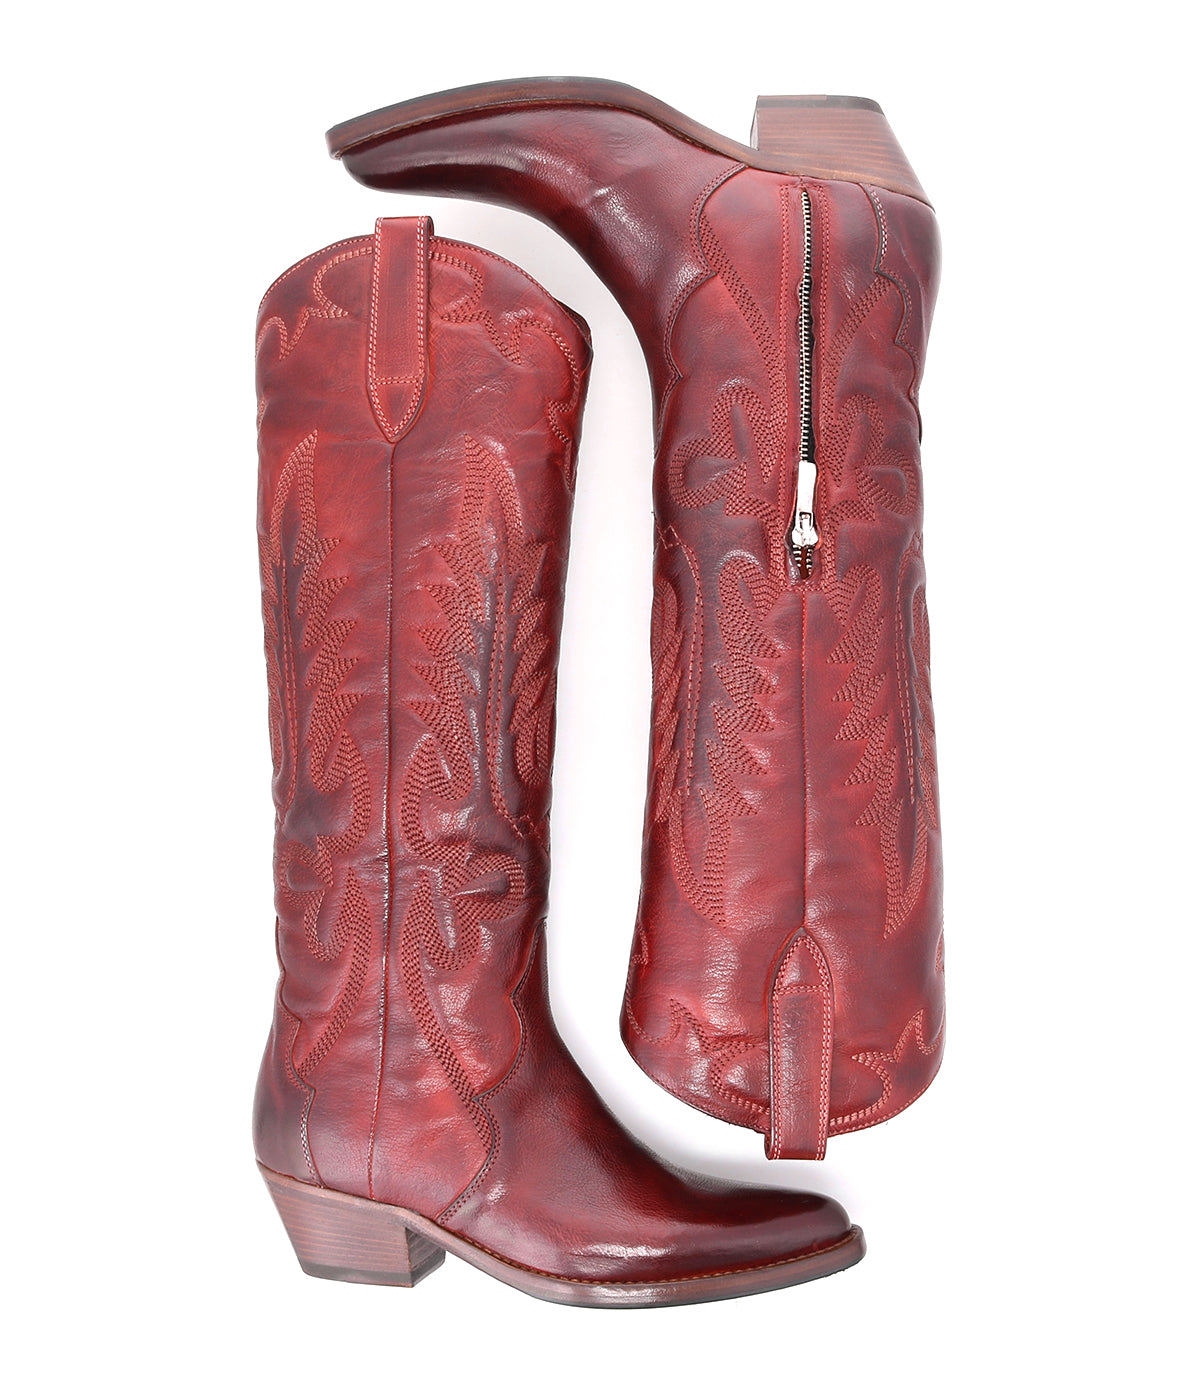 A pair of red leather Finito cowboy boots with a distressed finish, set against a white background, by Bed Stu.